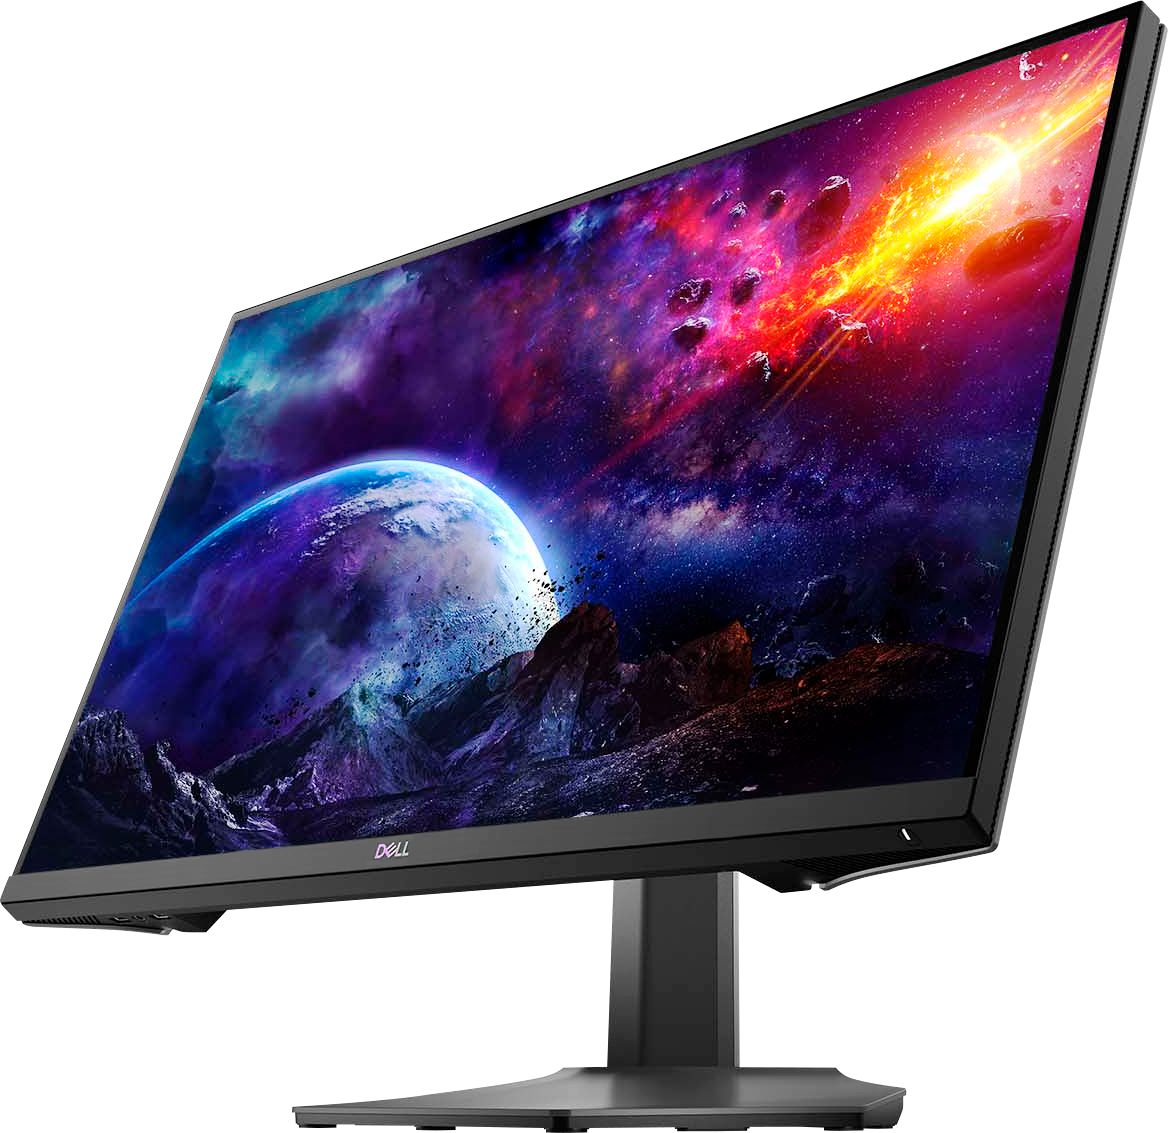 Dell on X: Meet the new Dell 27 4K USB-C (P2721Q) and Dell 32 USB-C  (P3221D) Monitors, our latest members of the P-series family. With a sleek  and space-efficient design, our latest